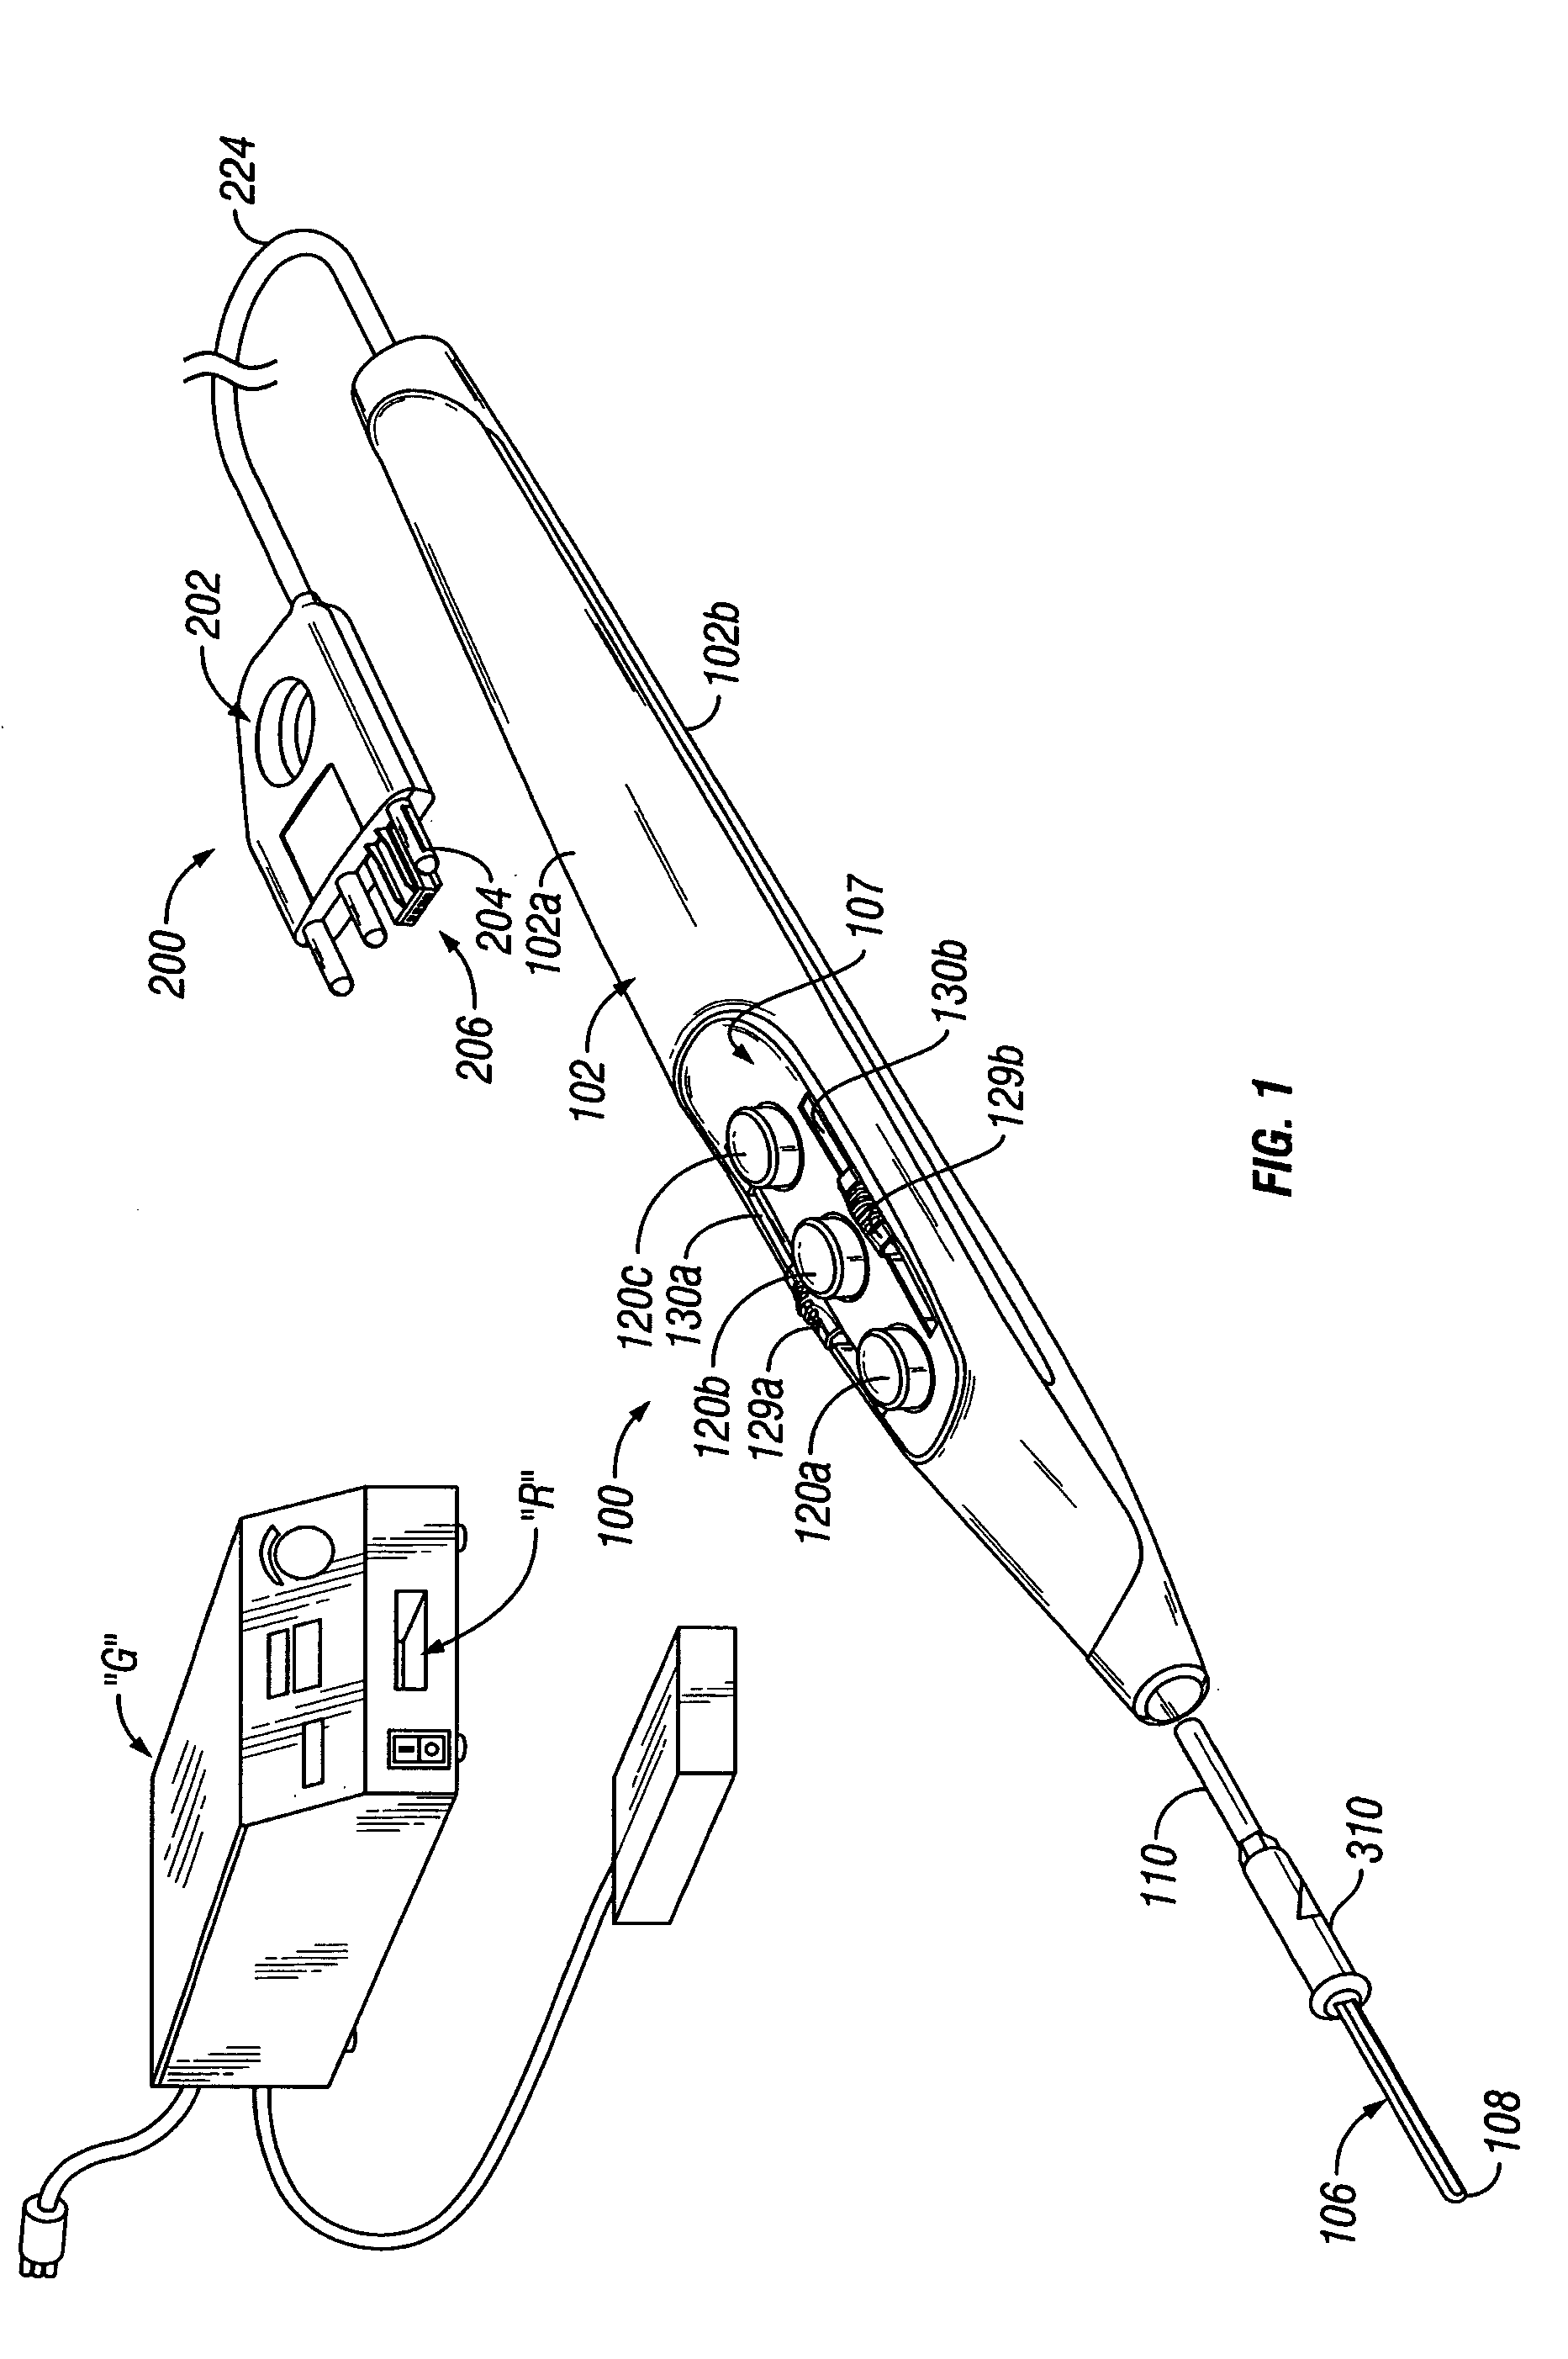 Electrosurgical pencil with improved controls